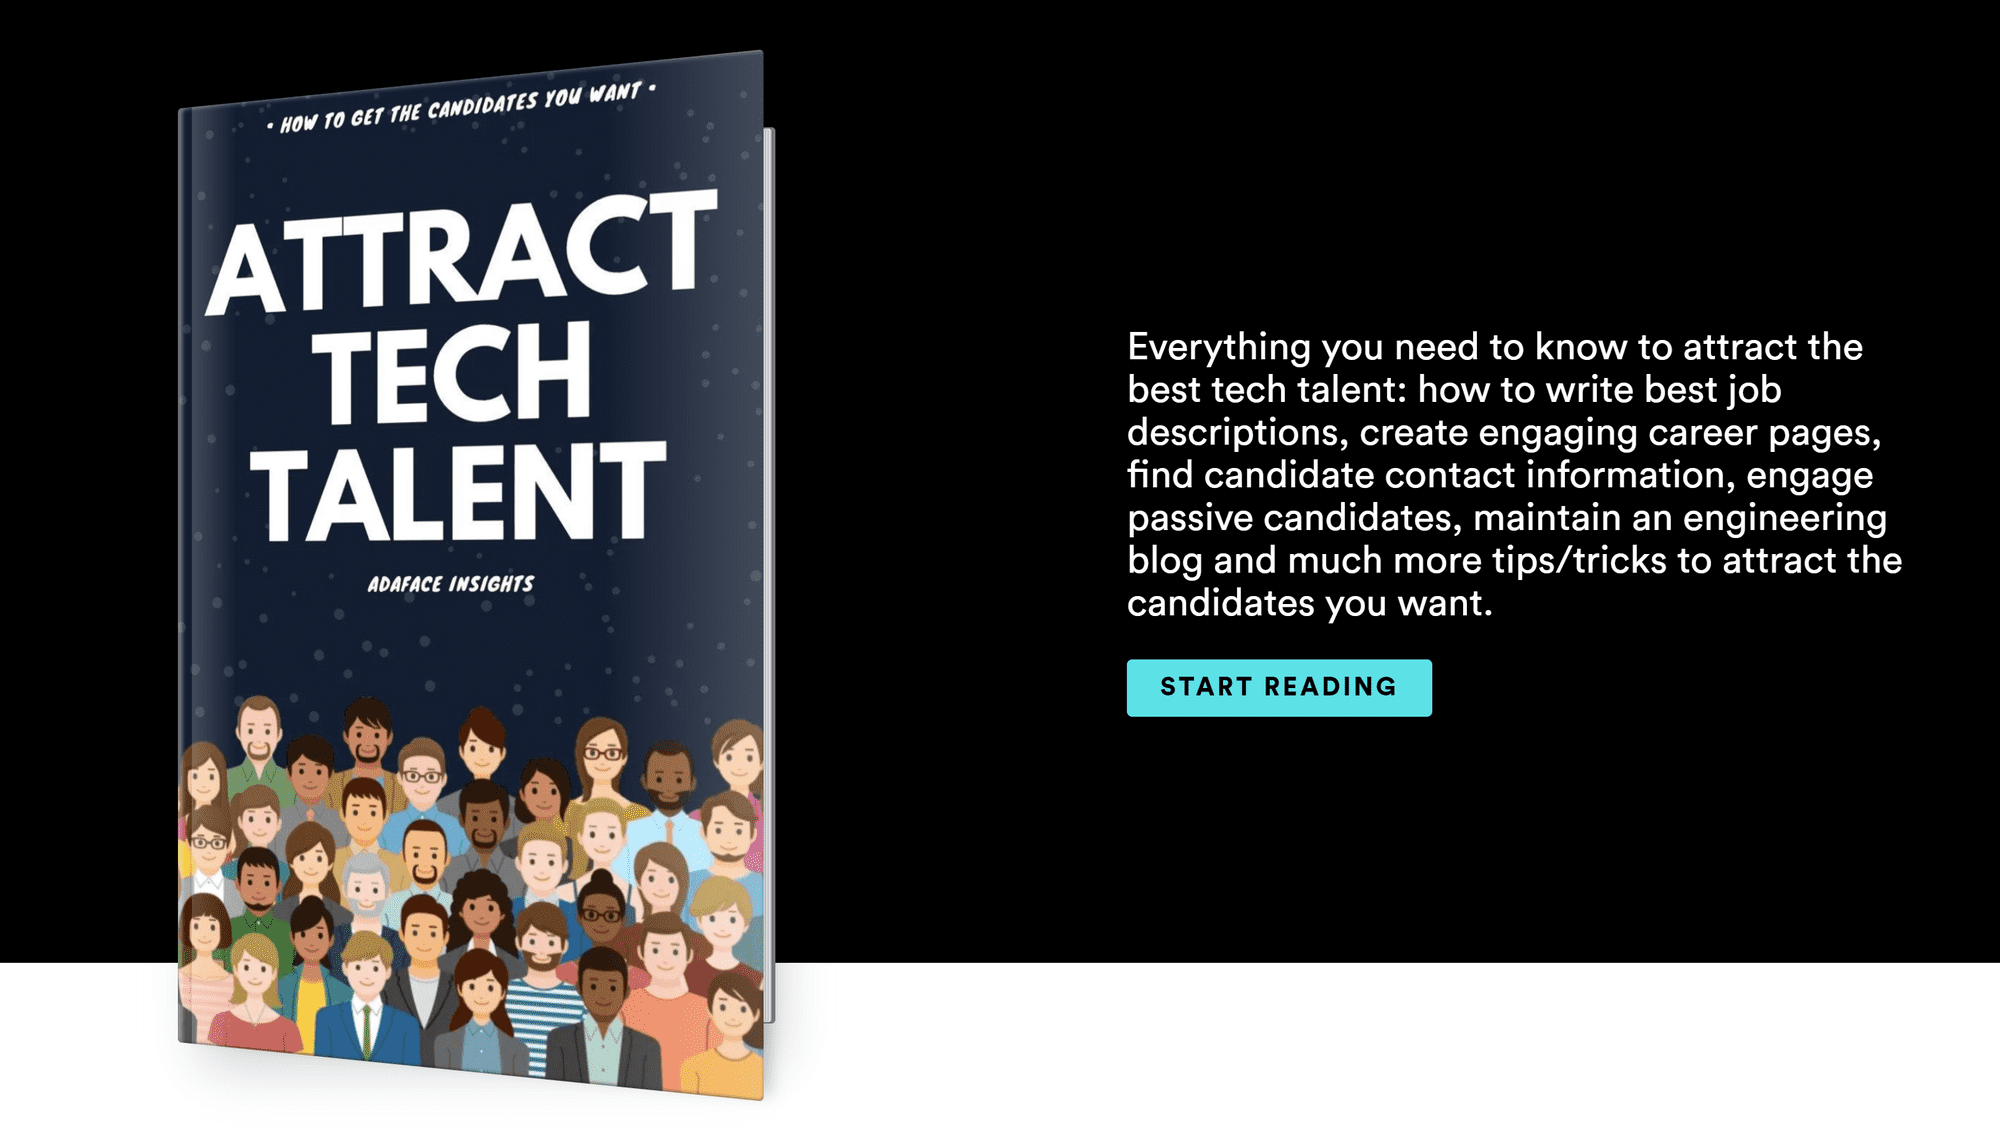 How to attract the best technical talent